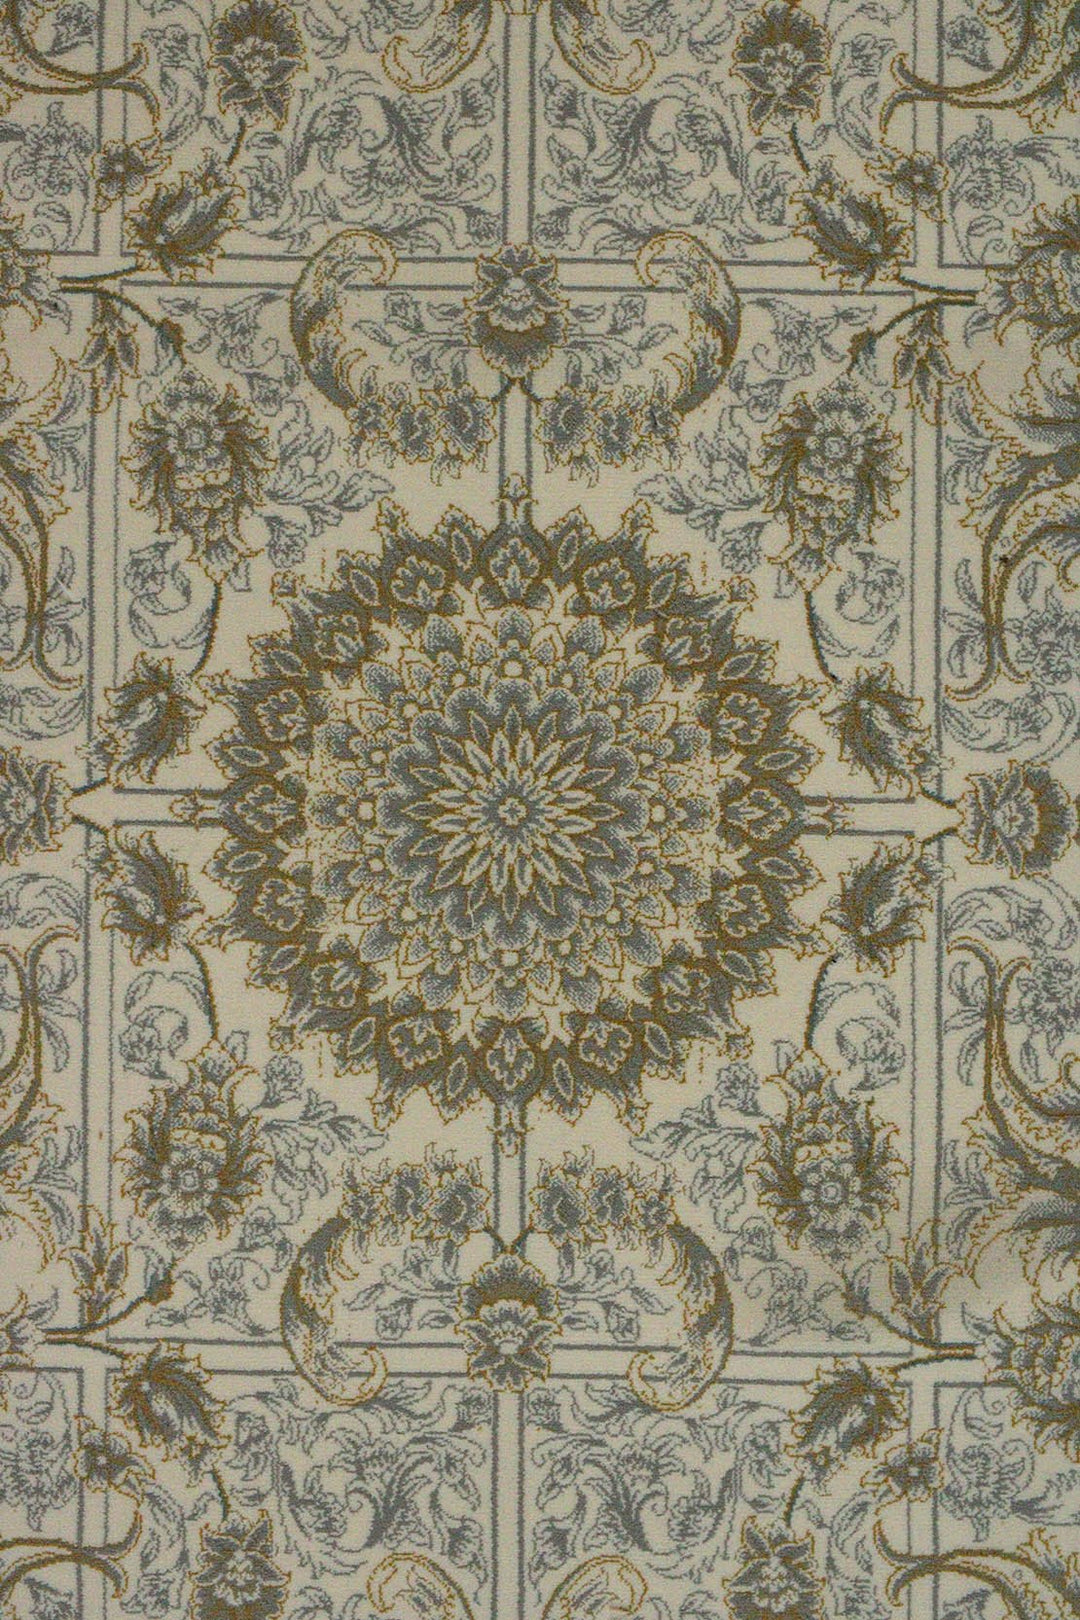 Iranian Premium Quality Hedyeh Collection (1000) Rug - 8.2 x 11. FT - Beige - Resilient Construction for Long-Lasting Use - V Surfaces